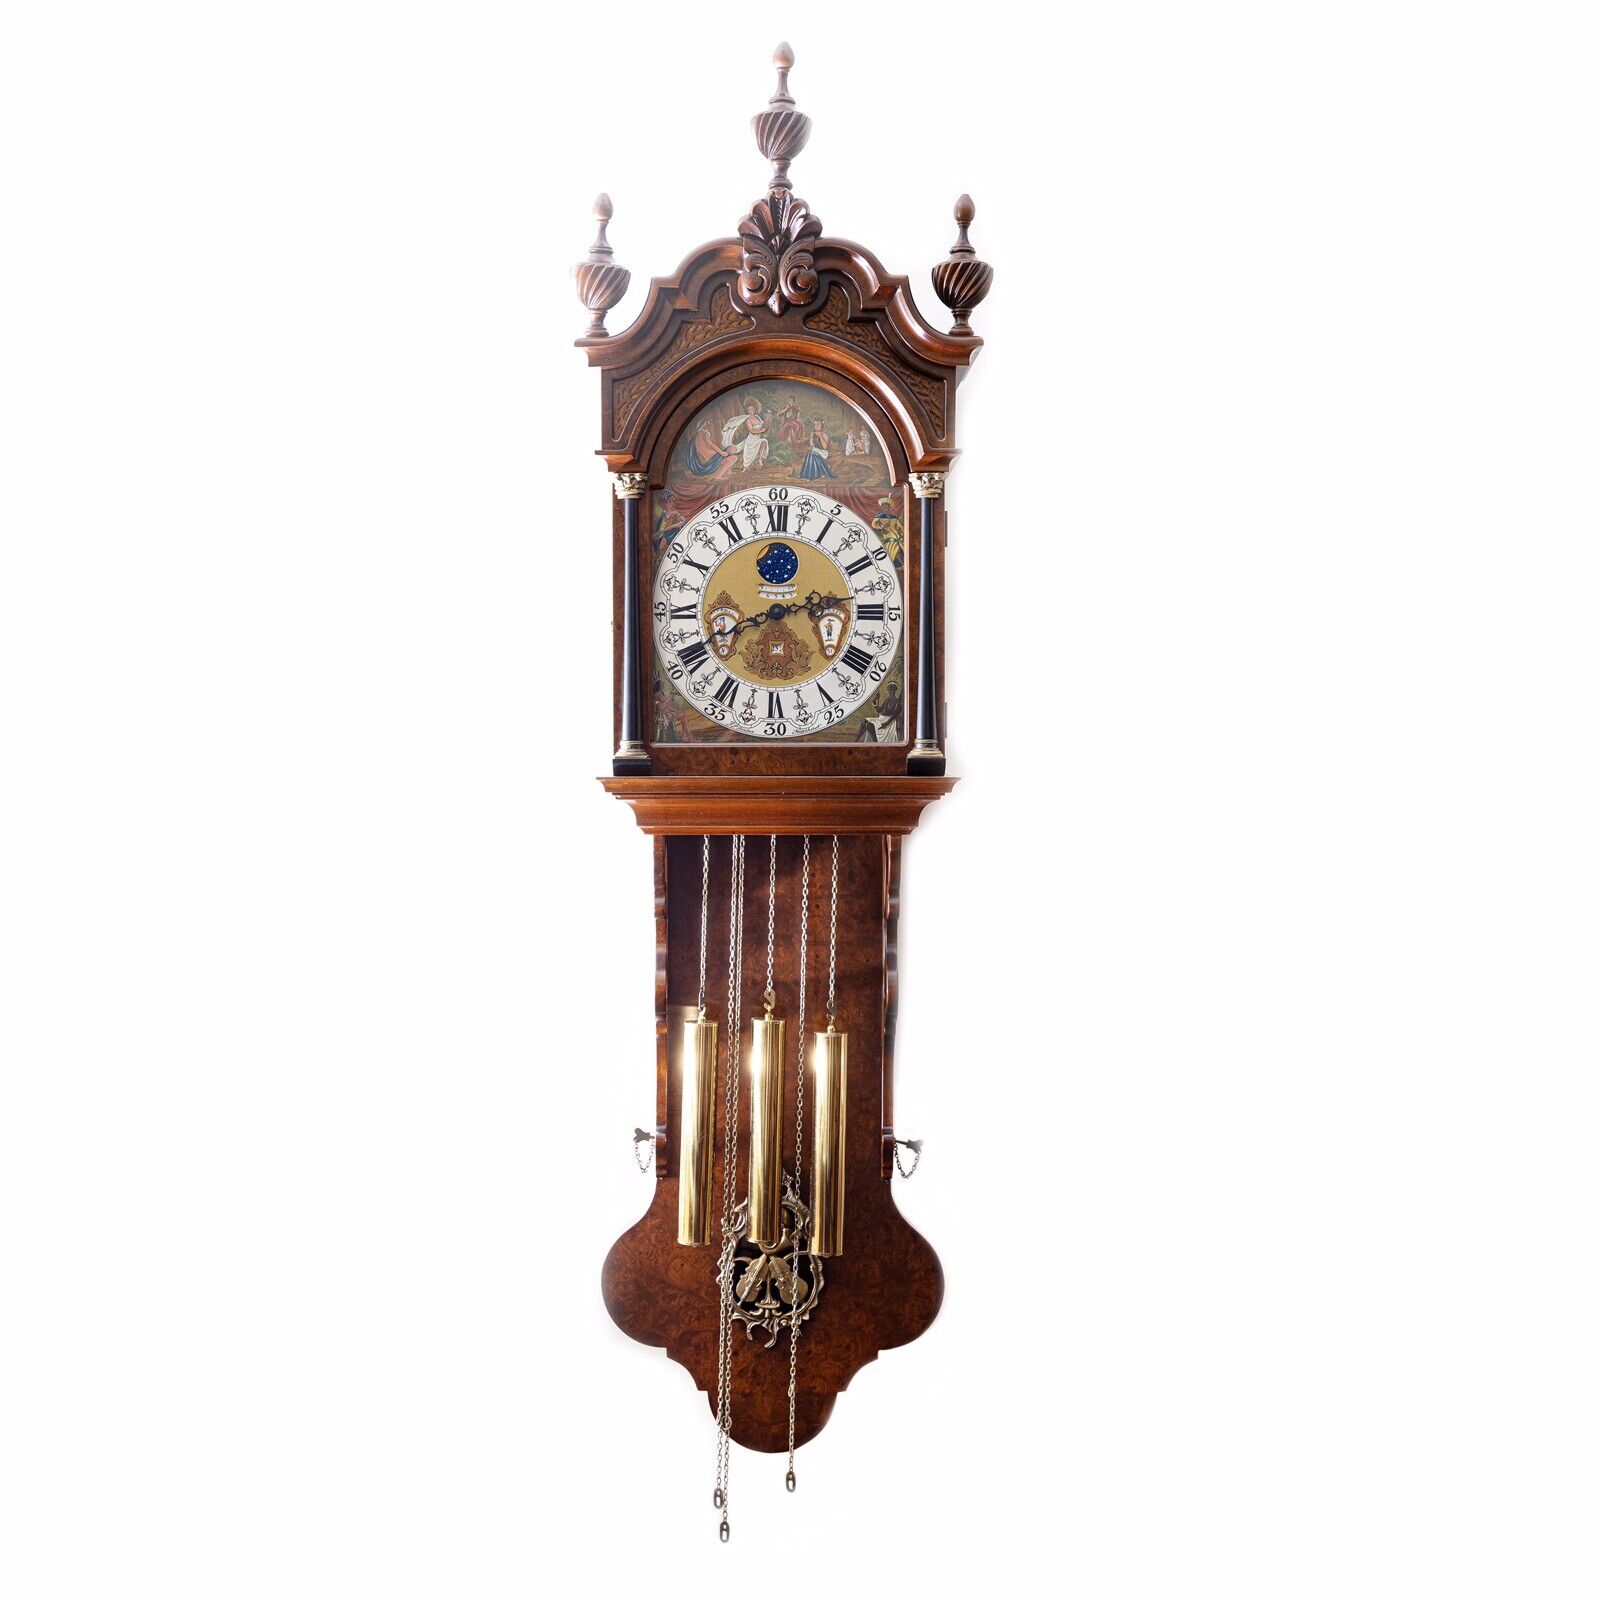 RARE GERMANY CALENDAR AND MOON WALL STRIKE TRIPLE CHIME CLOCK,3 WEIGHTS DRIVEN